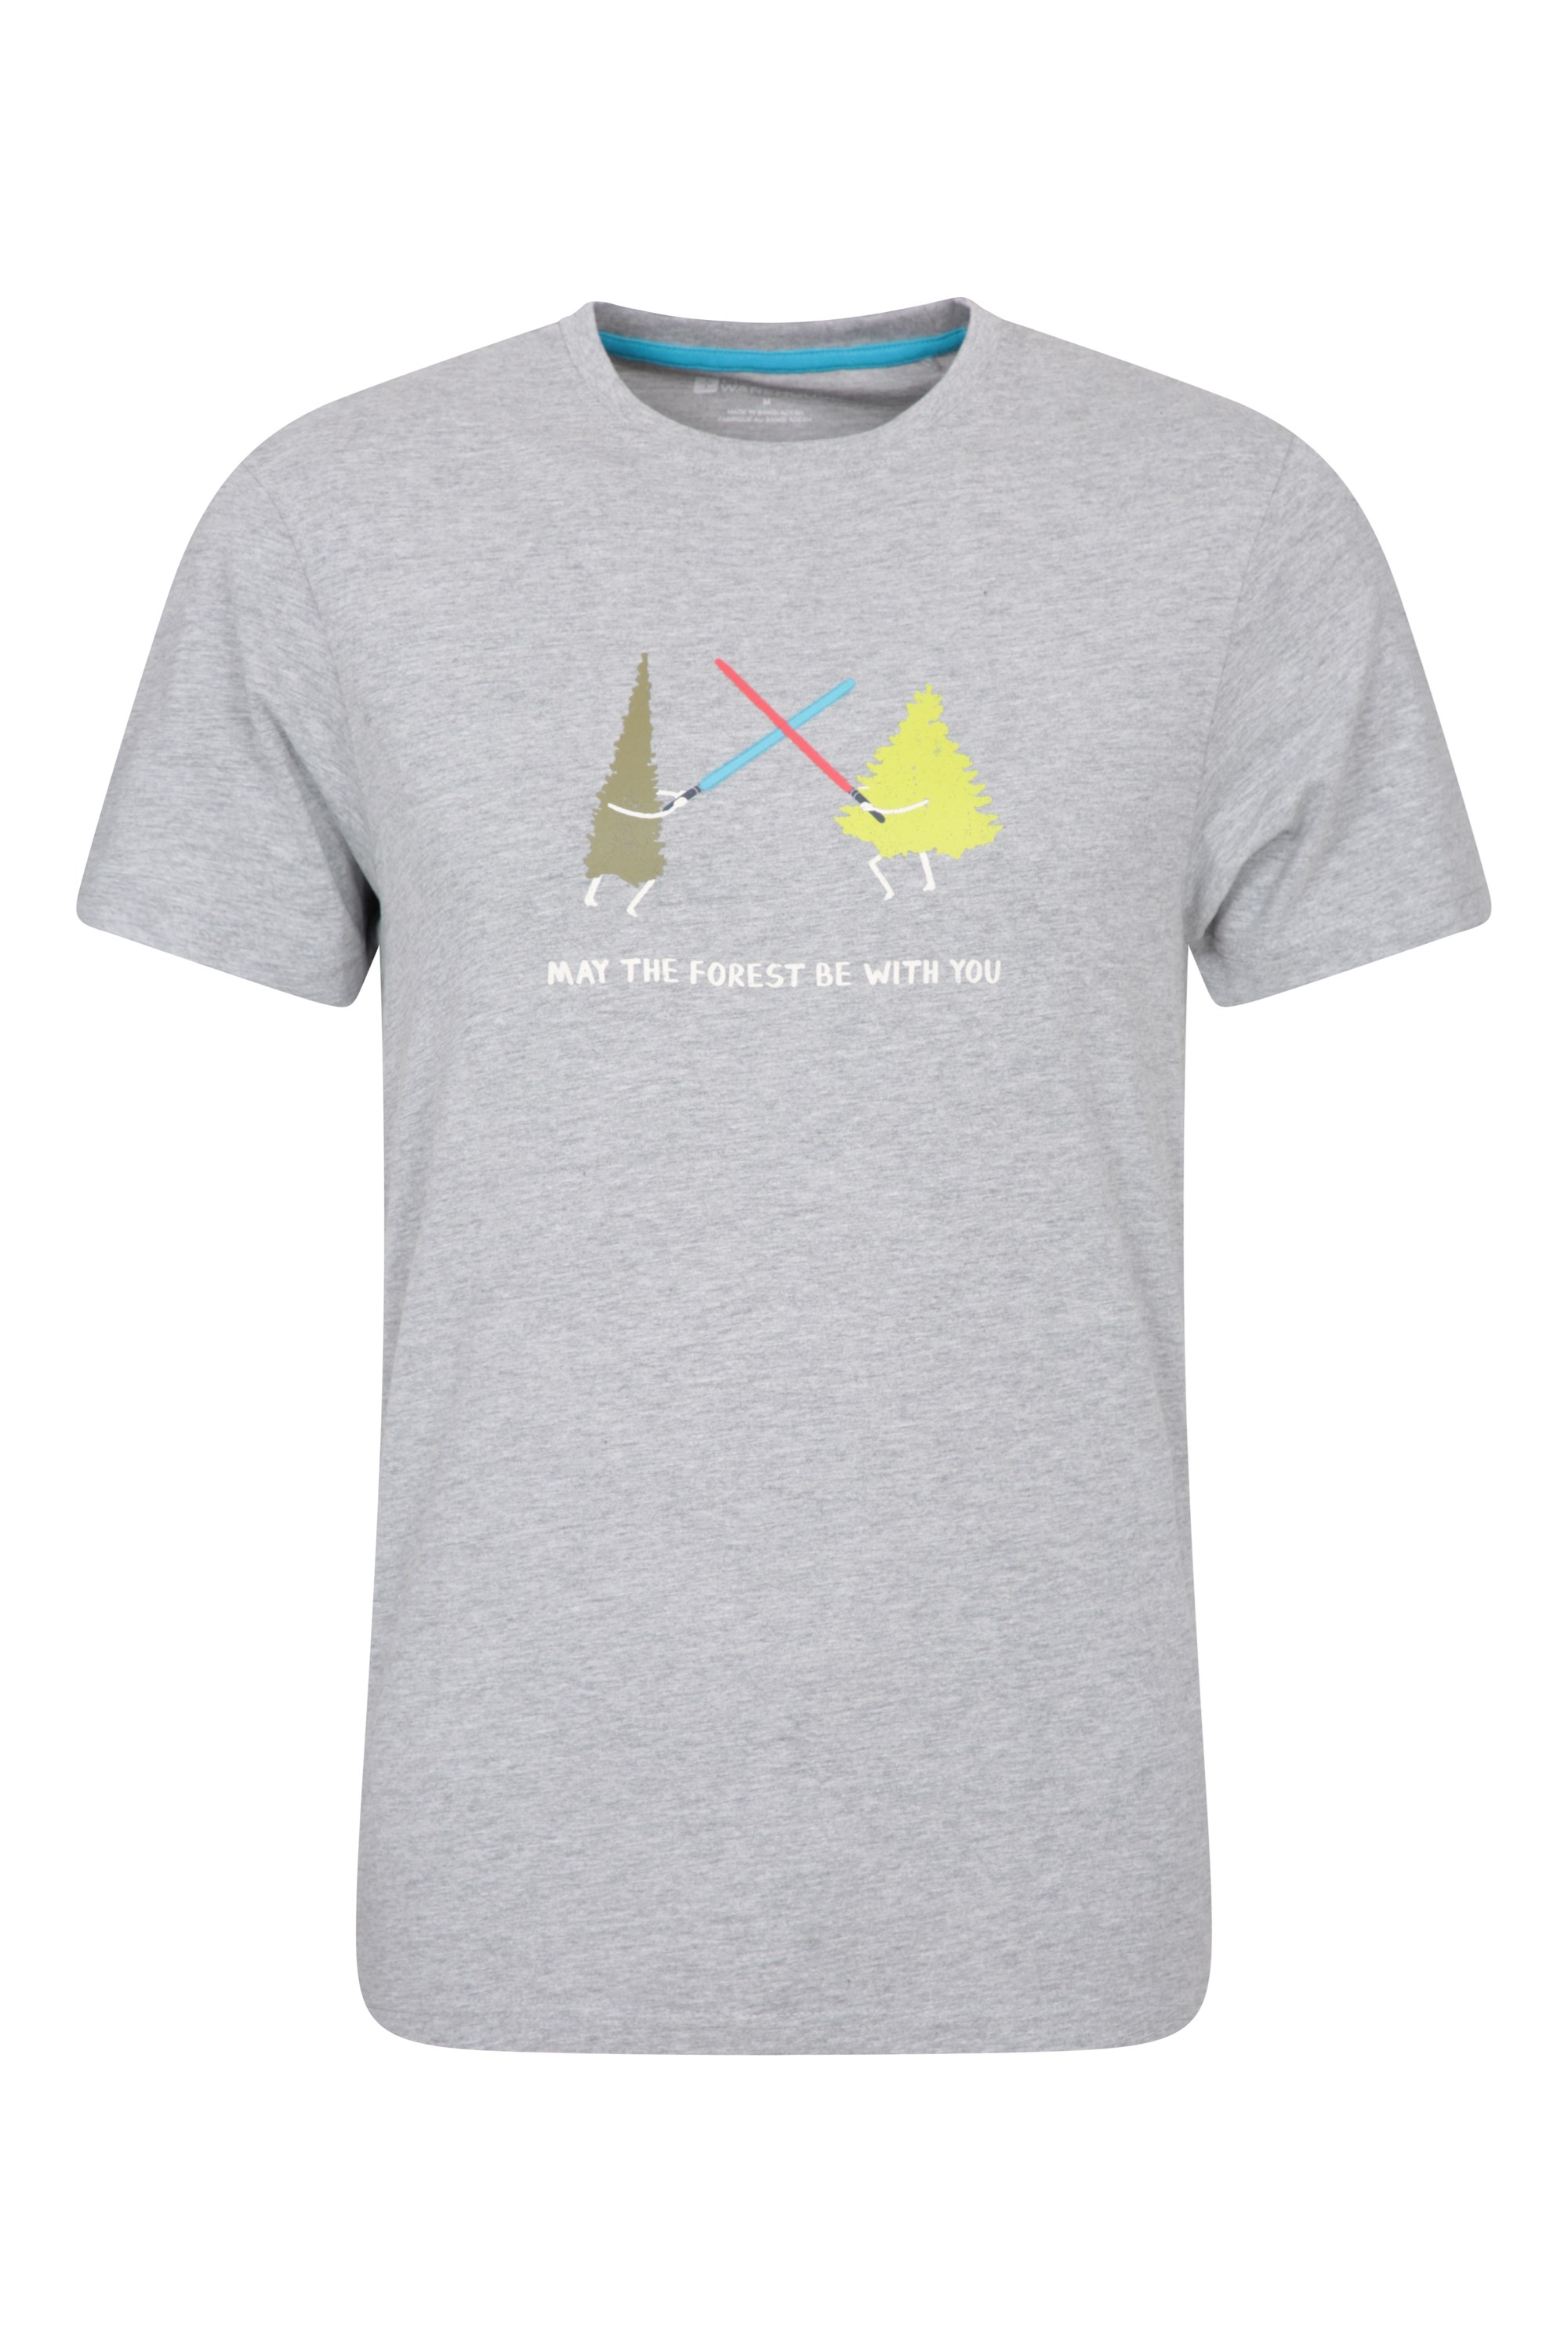 Tee-shirt May The Forest Be With You homme - Gris